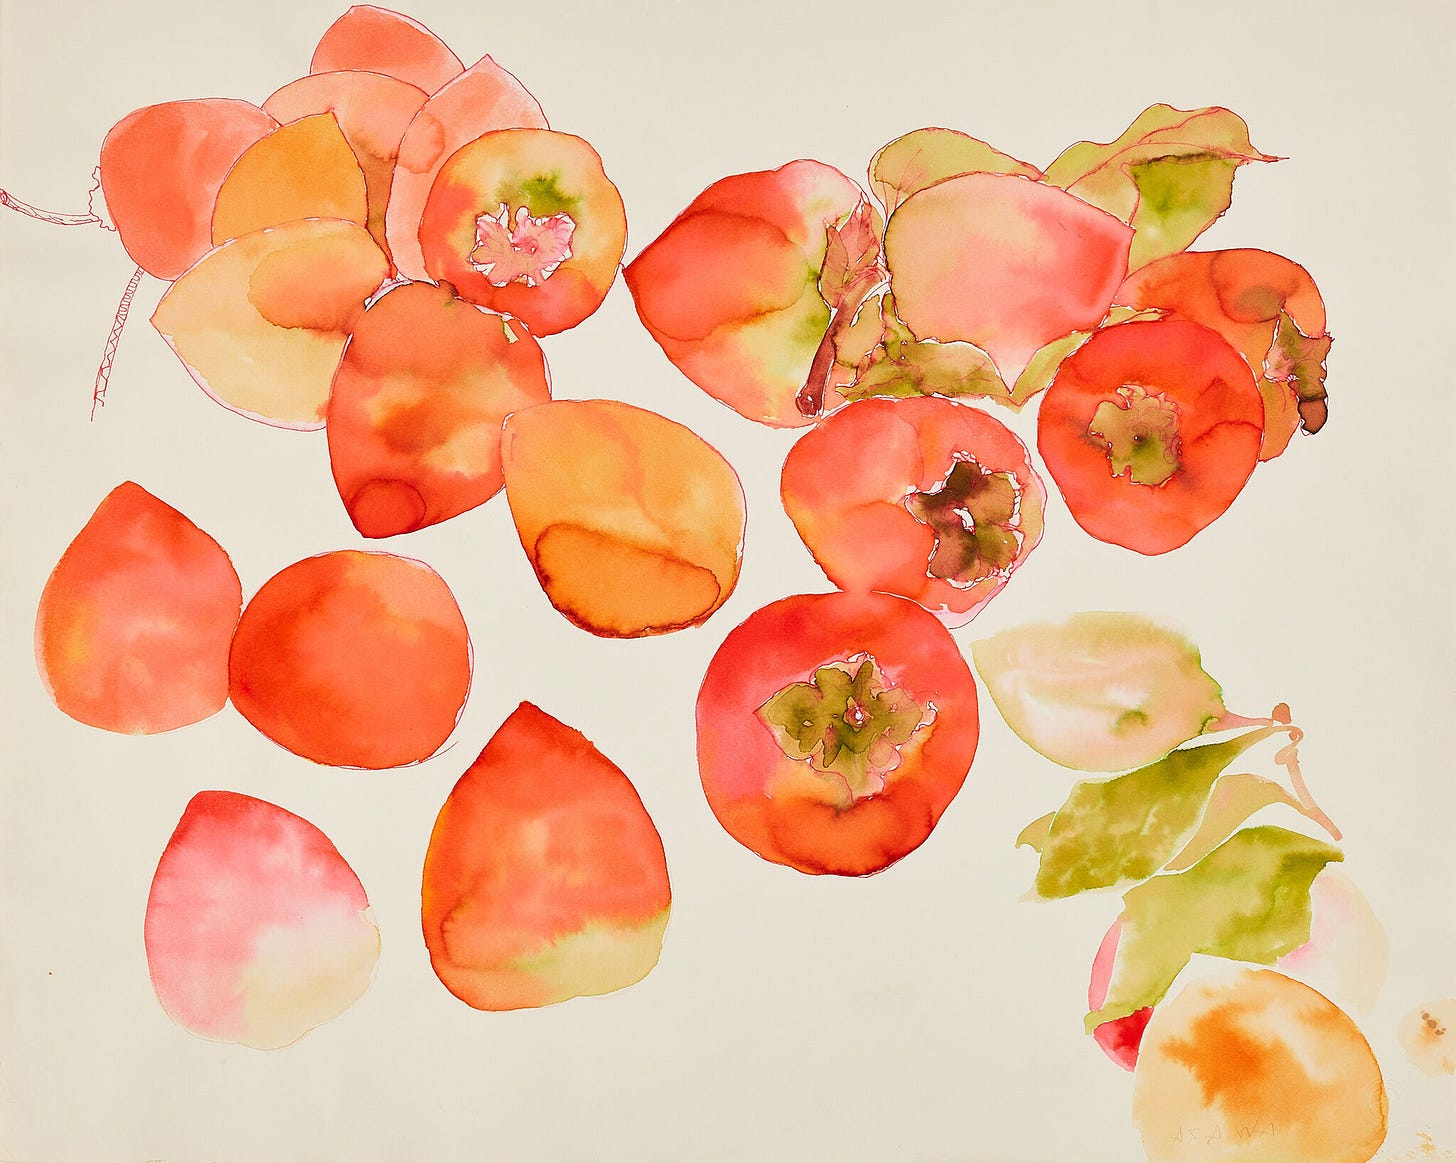 A watercolor by Ruth Asawa showing an array of bright orange-red persimmons, some with leaves.